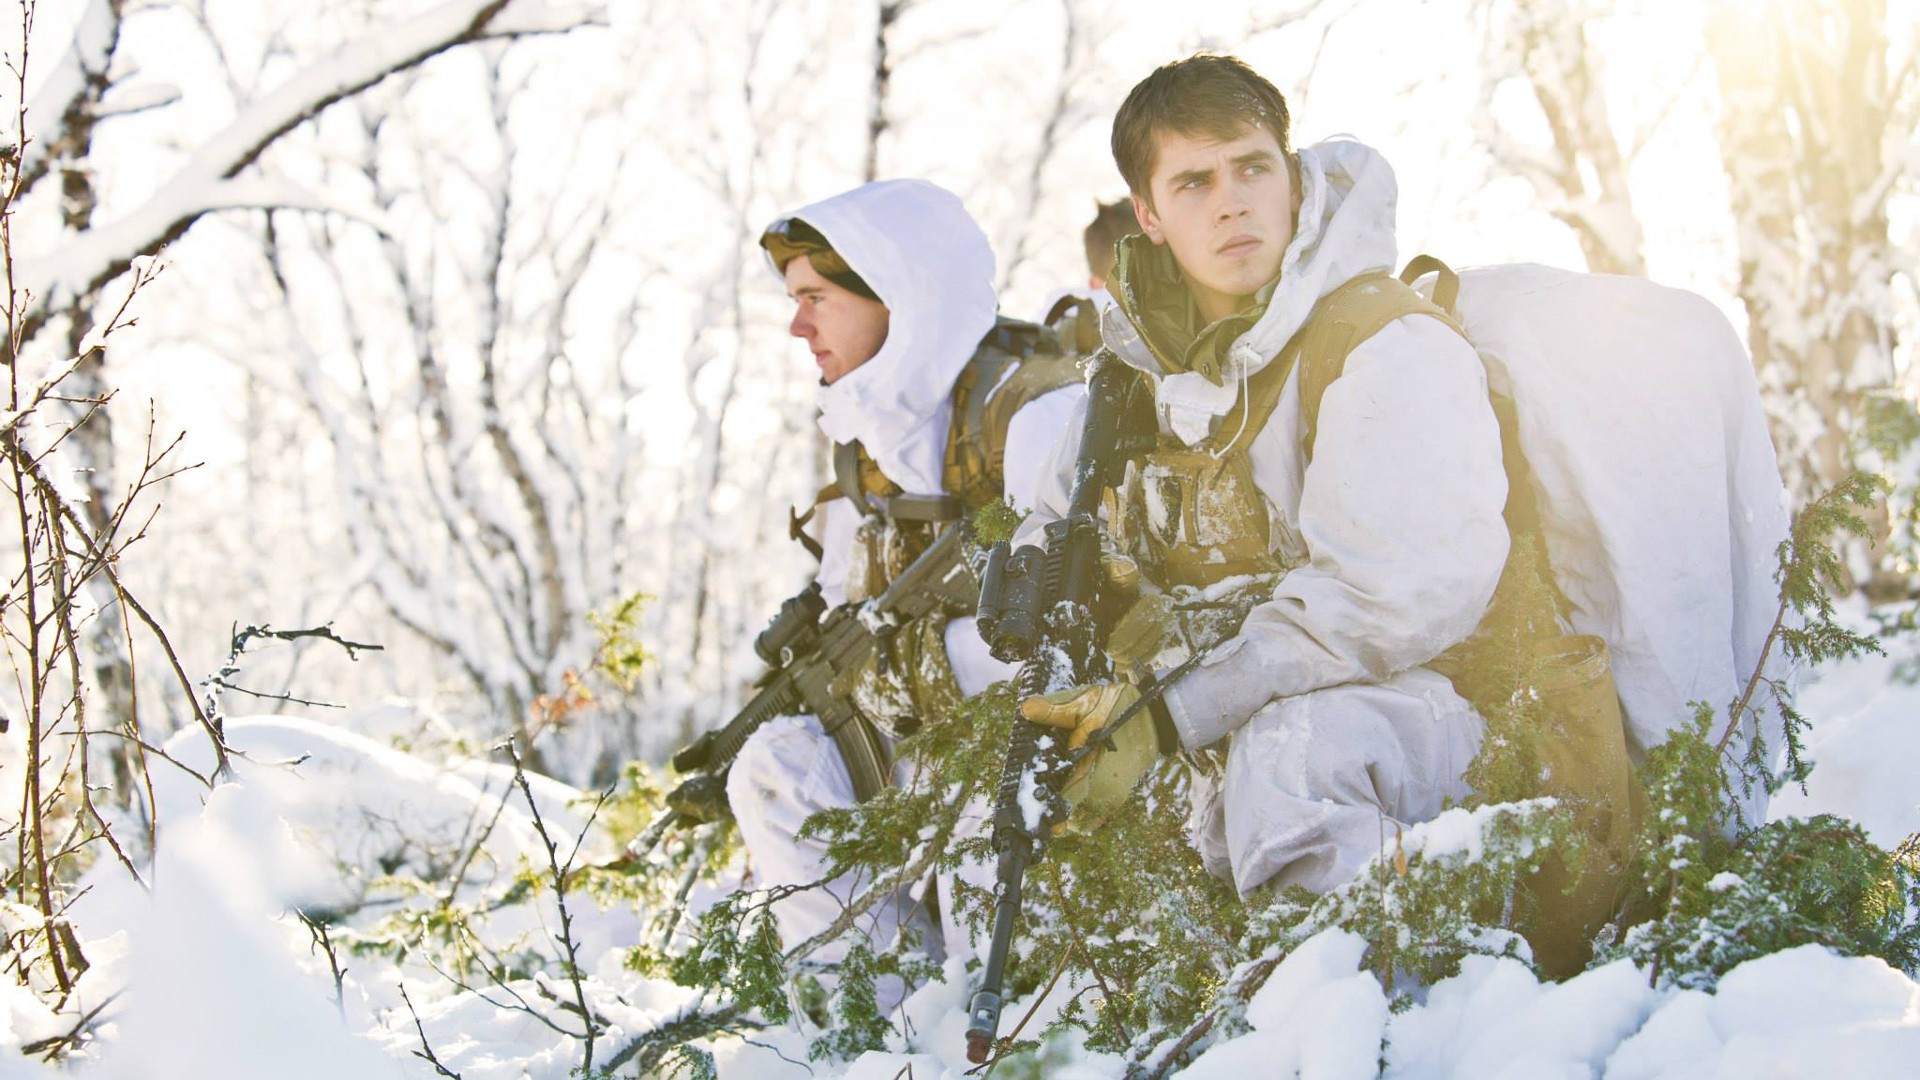 People 1920x1080 military Norway Norwegian Army snow forest men winter weapon